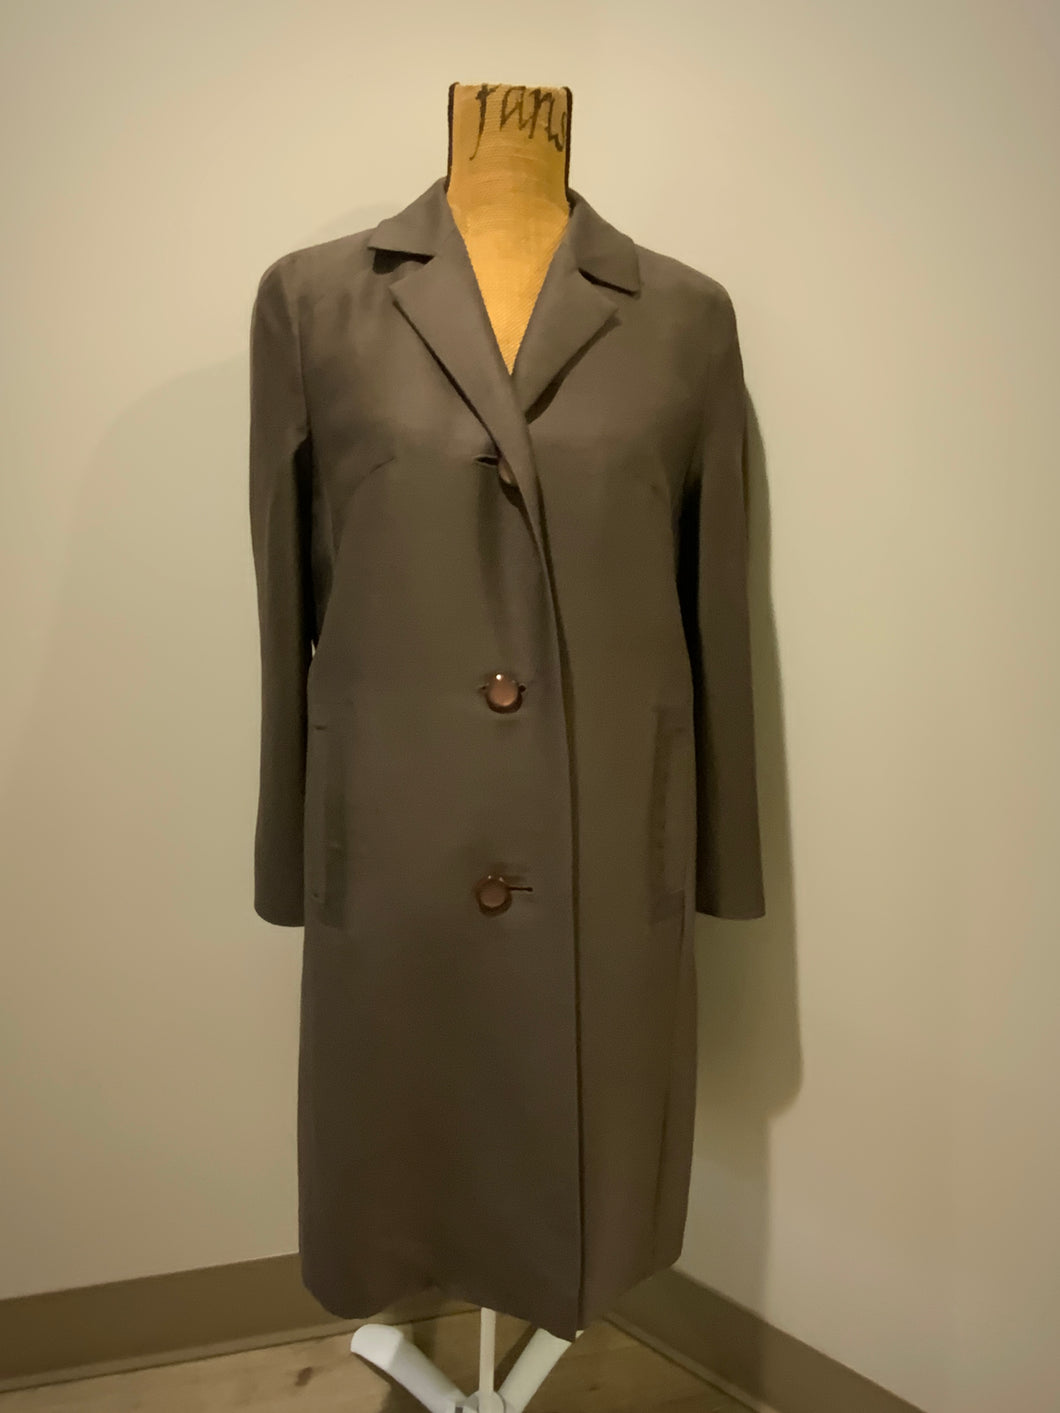 Kingspier Vintage - Creation Exclusive 1950’s dark brown single breasted trench coat with buttons and welt pockets. Size small.